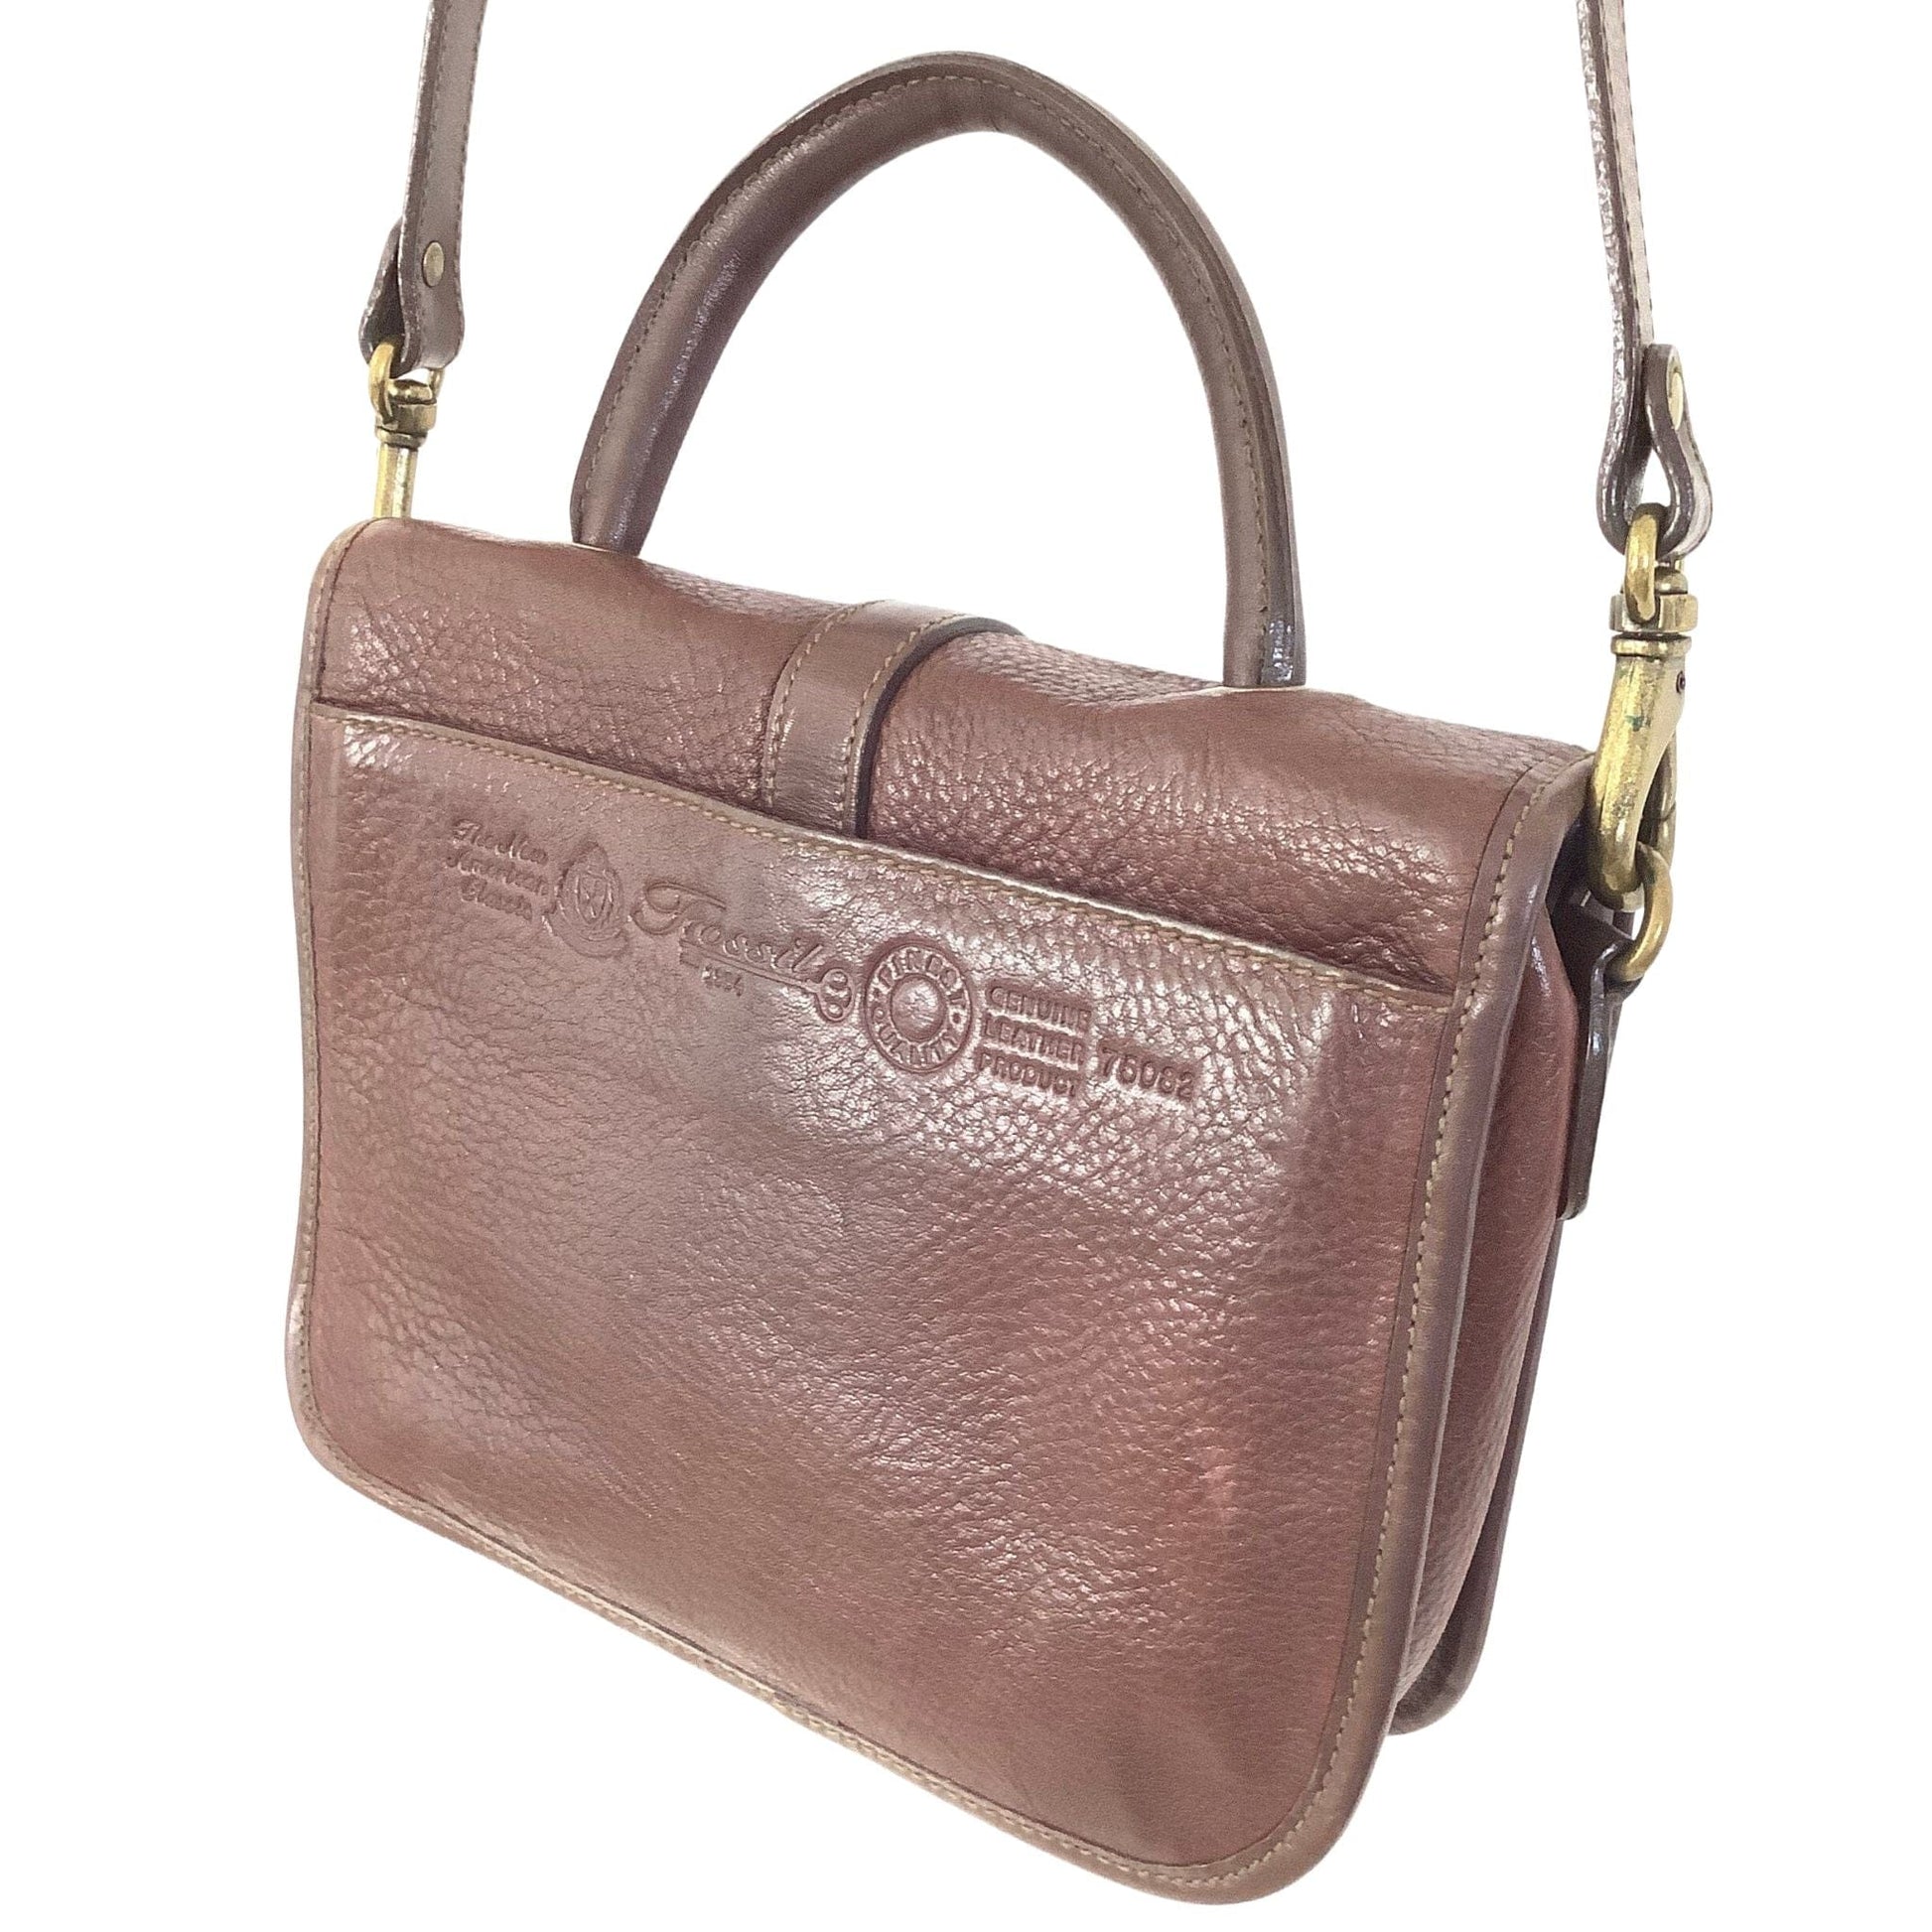 Fossil Tan Leather Bag Tan / Leather / Vintage 1980s